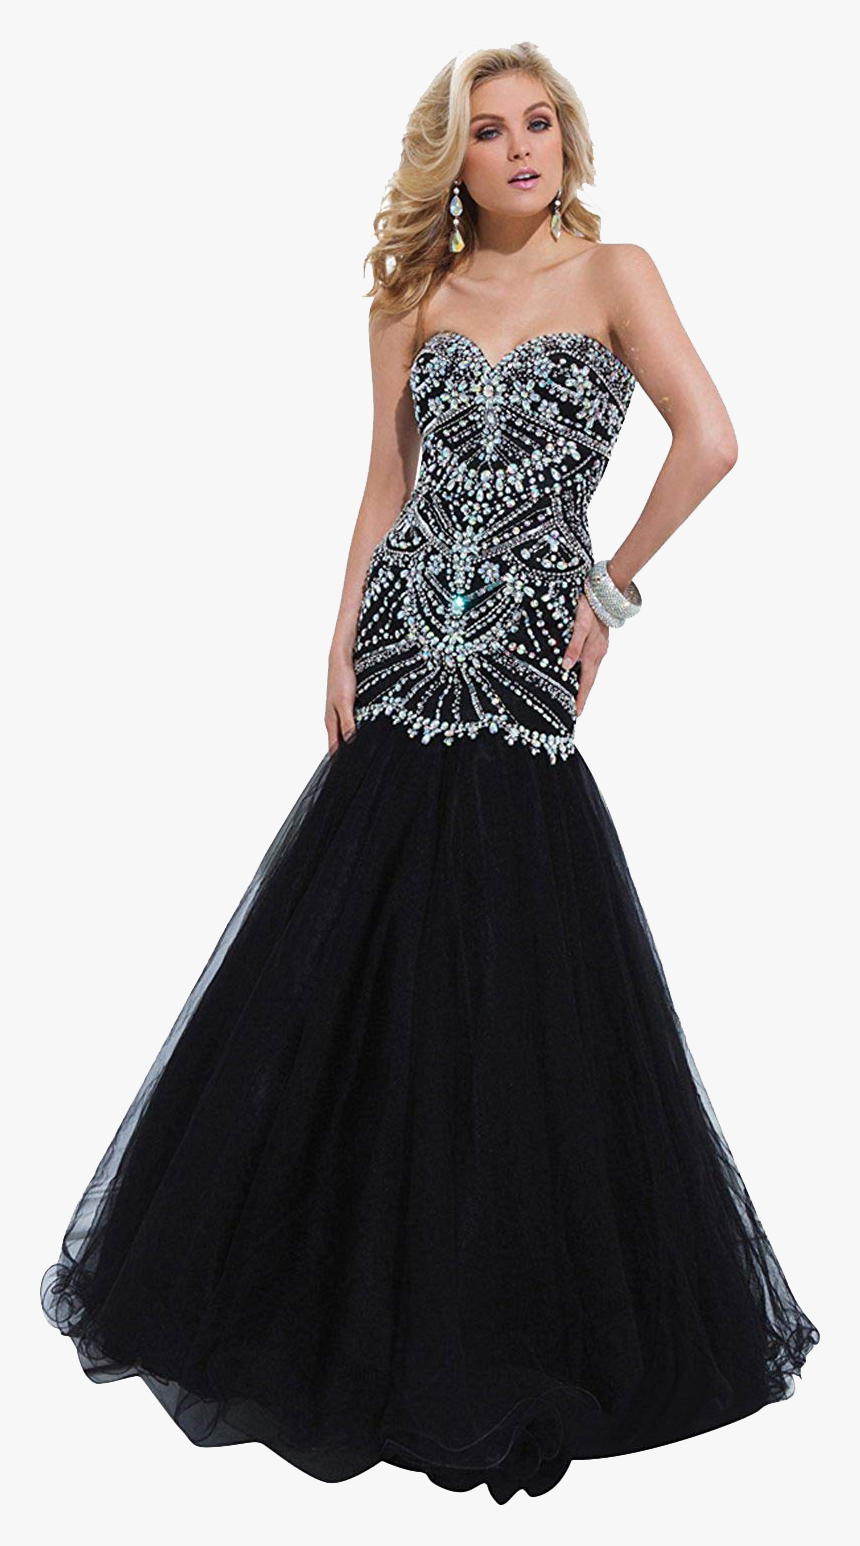 Evening Dresses Png Image Download - Night In Paris Gown, Transparent Png, Free Download